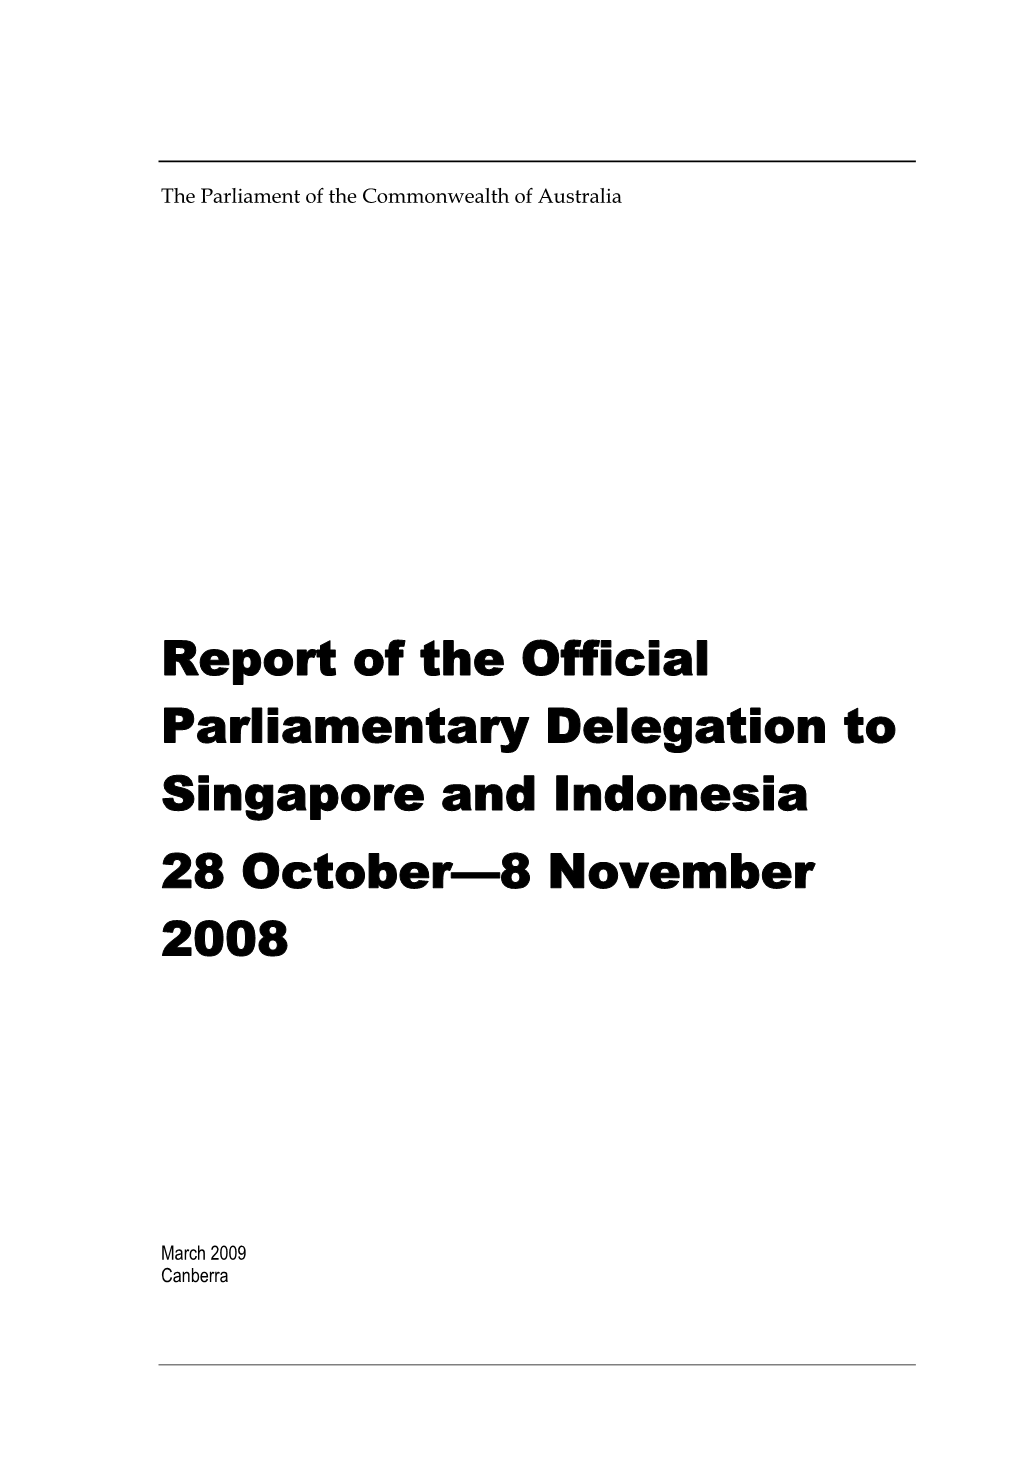 Report of the Official Parliamentary Delegation to Singapore and Indonesia 28 October—8 November 2008